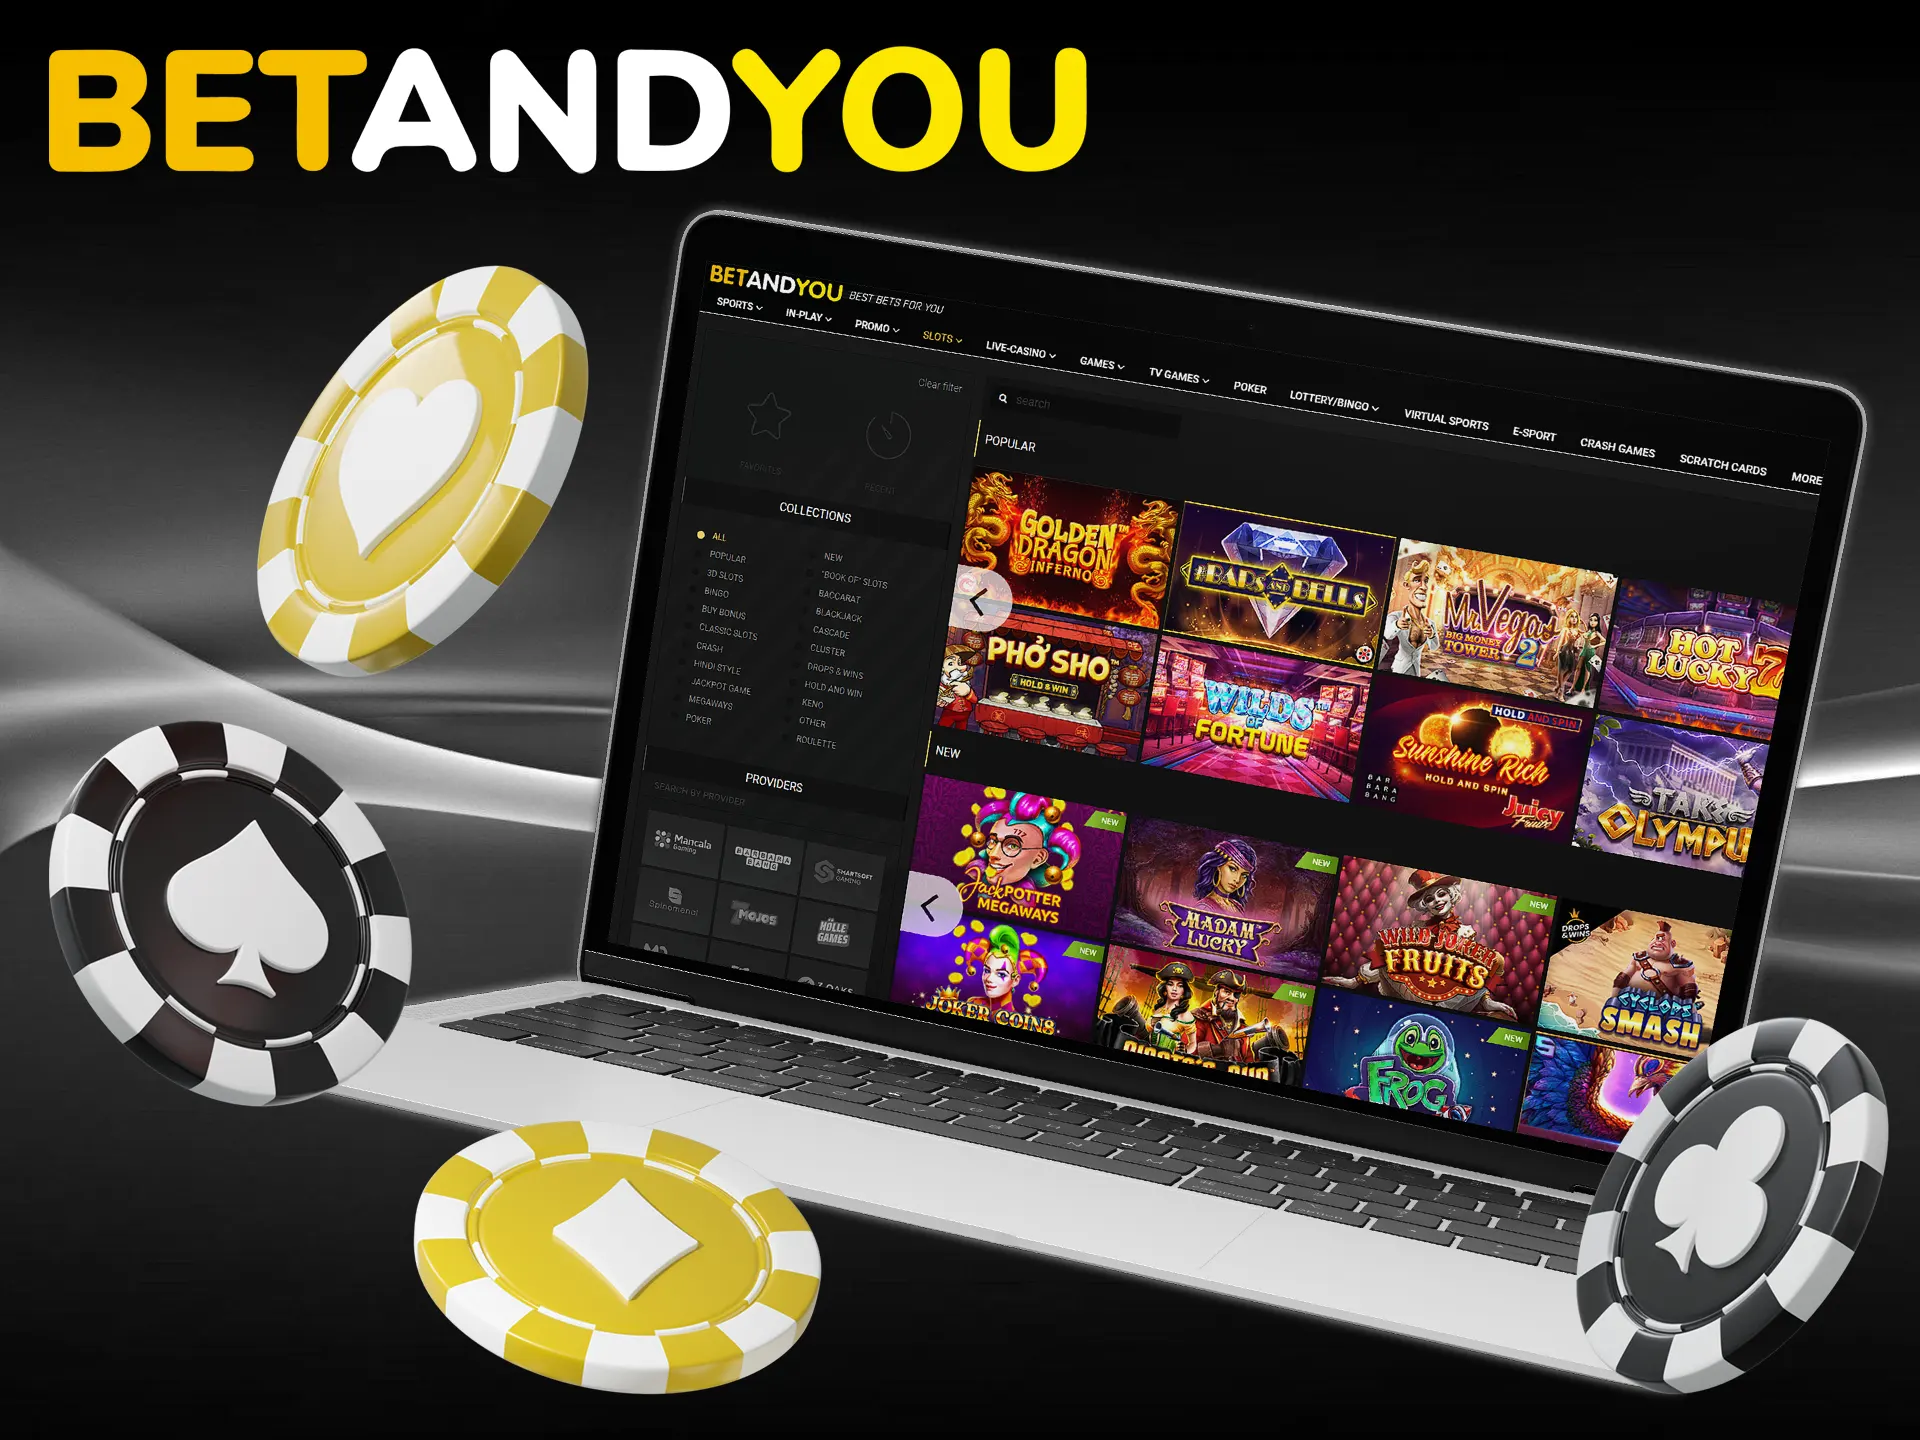 Win money by playing casino games at the Betandyou.